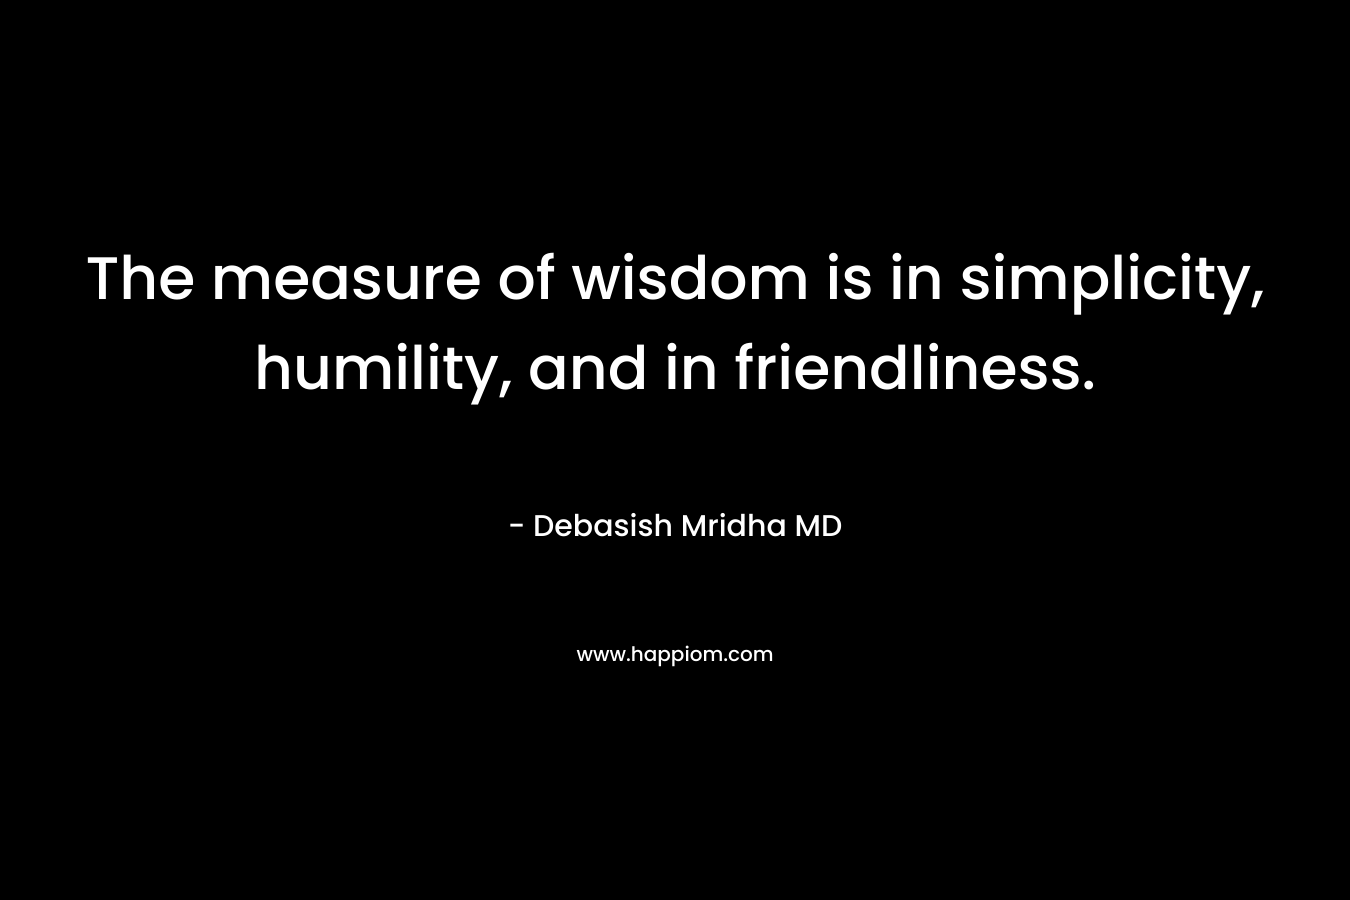 The measure of wisdom is in simplicity, humility, and in friendliness.